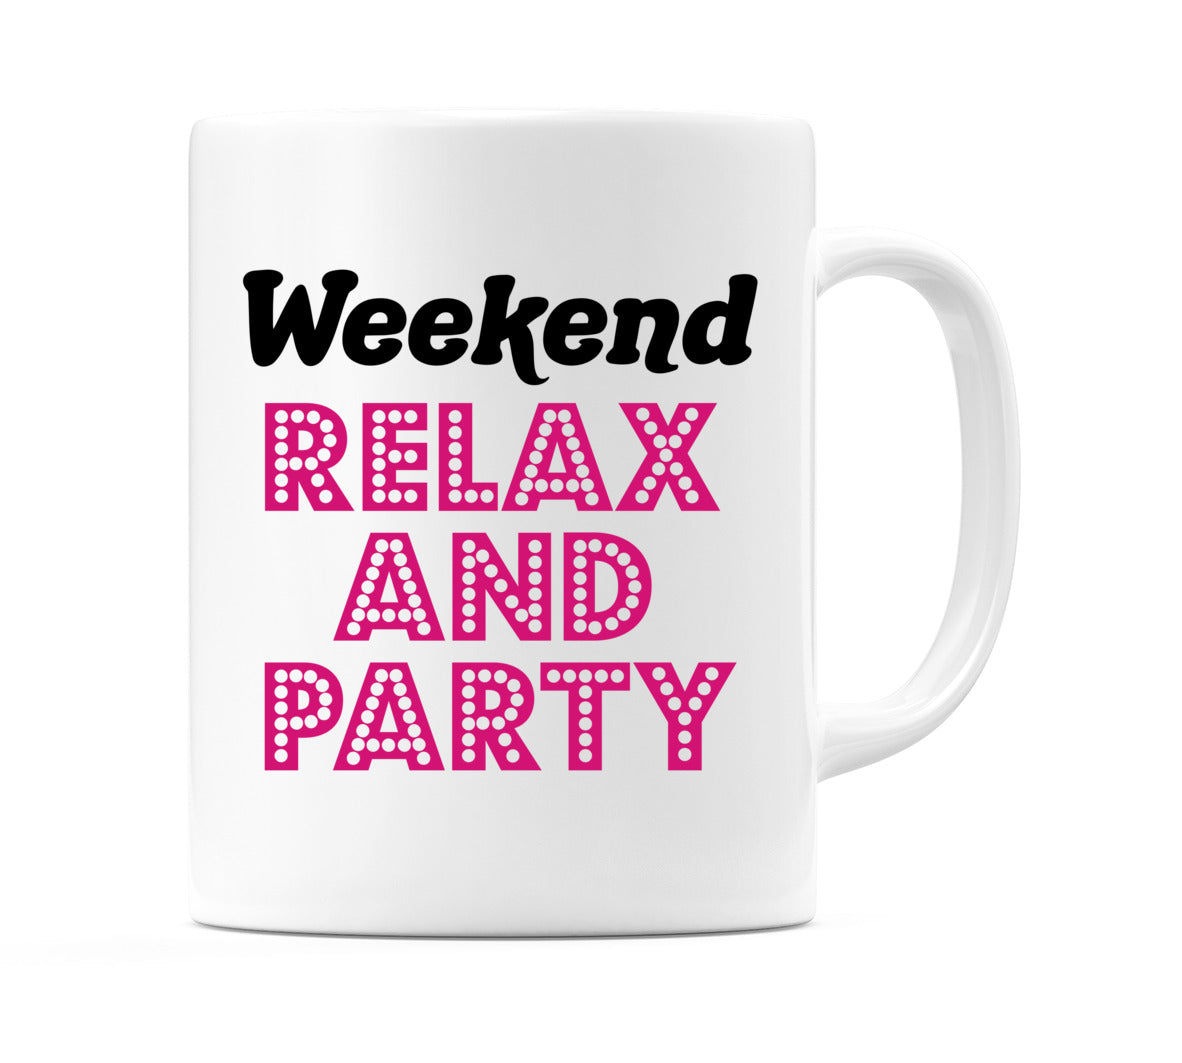 Weekend - PARTY & RELAX Mug